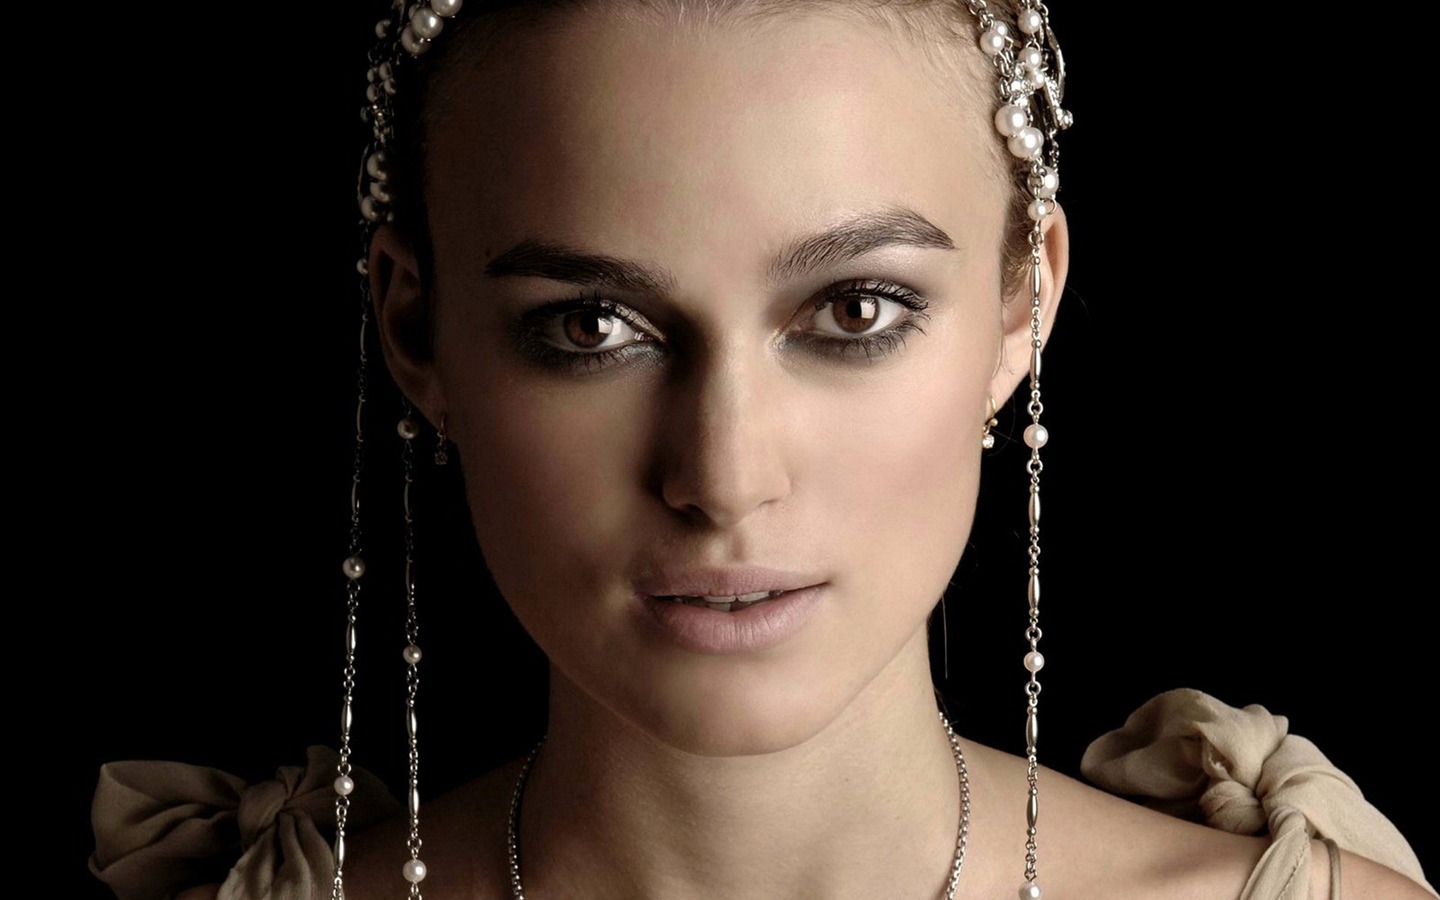 Keira Knightley #027 - 1440x900 Wallpapers Pictures Photos Images